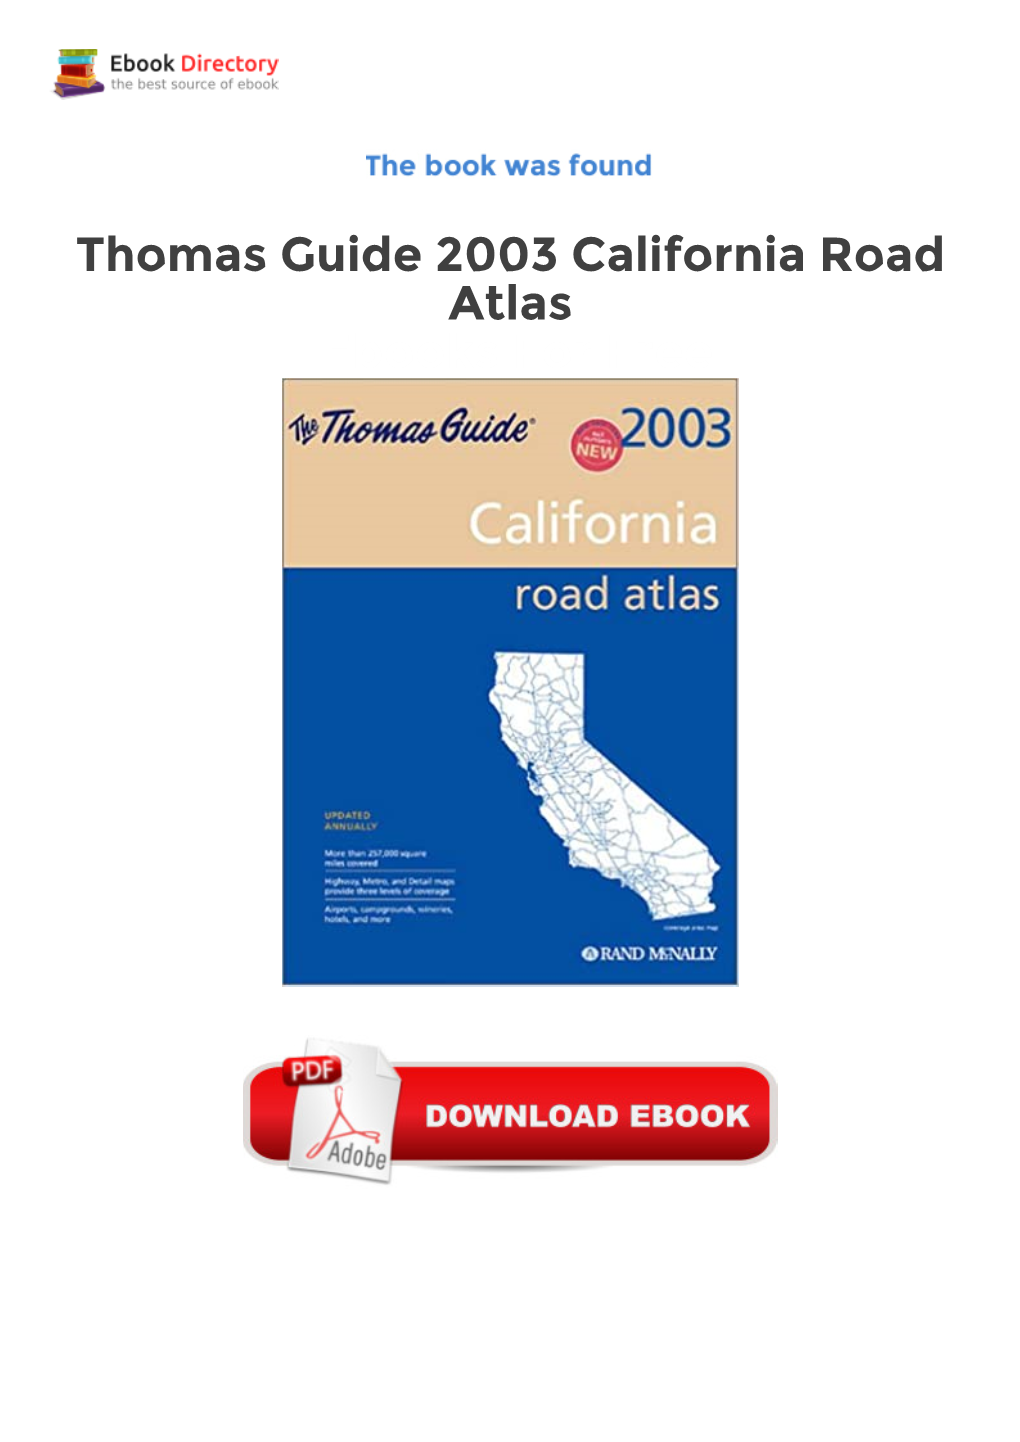 Thomas Guide 2003 California Road Atlas Ebooks for Free Book By